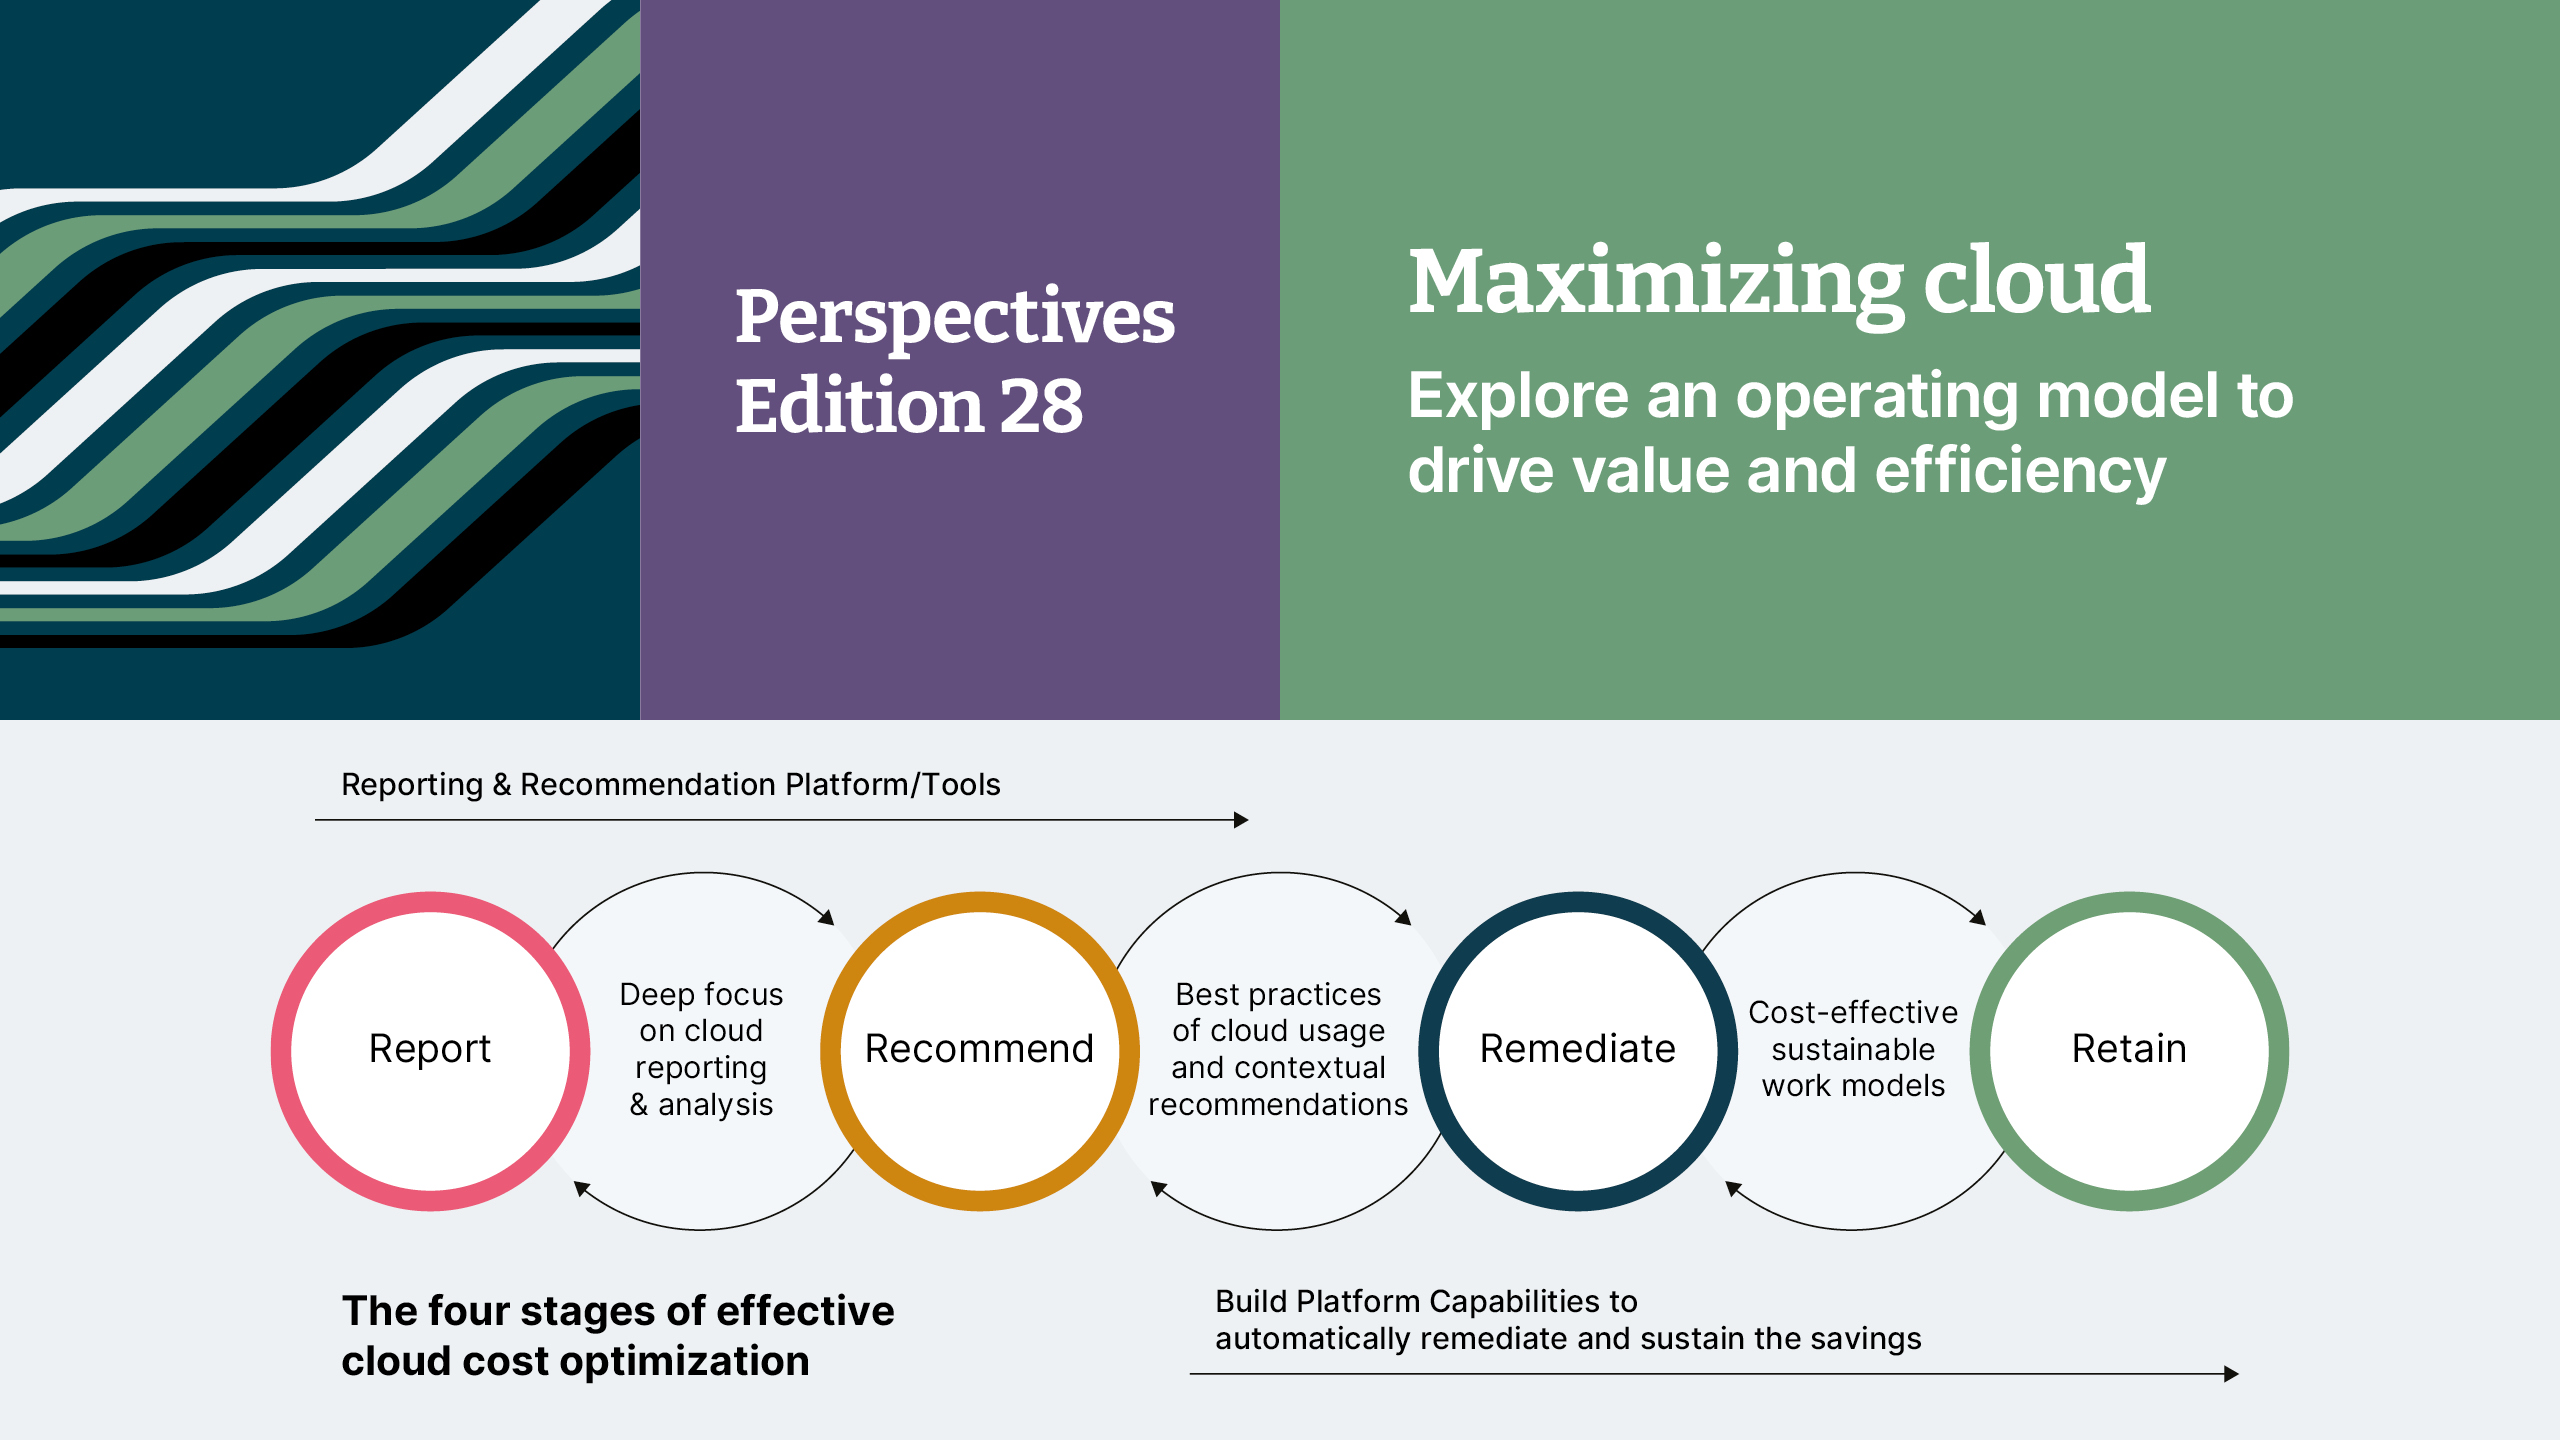 Perspectives edition 28: The four stages of effective cloud cost optimization are report, recommend, remediate and retain.